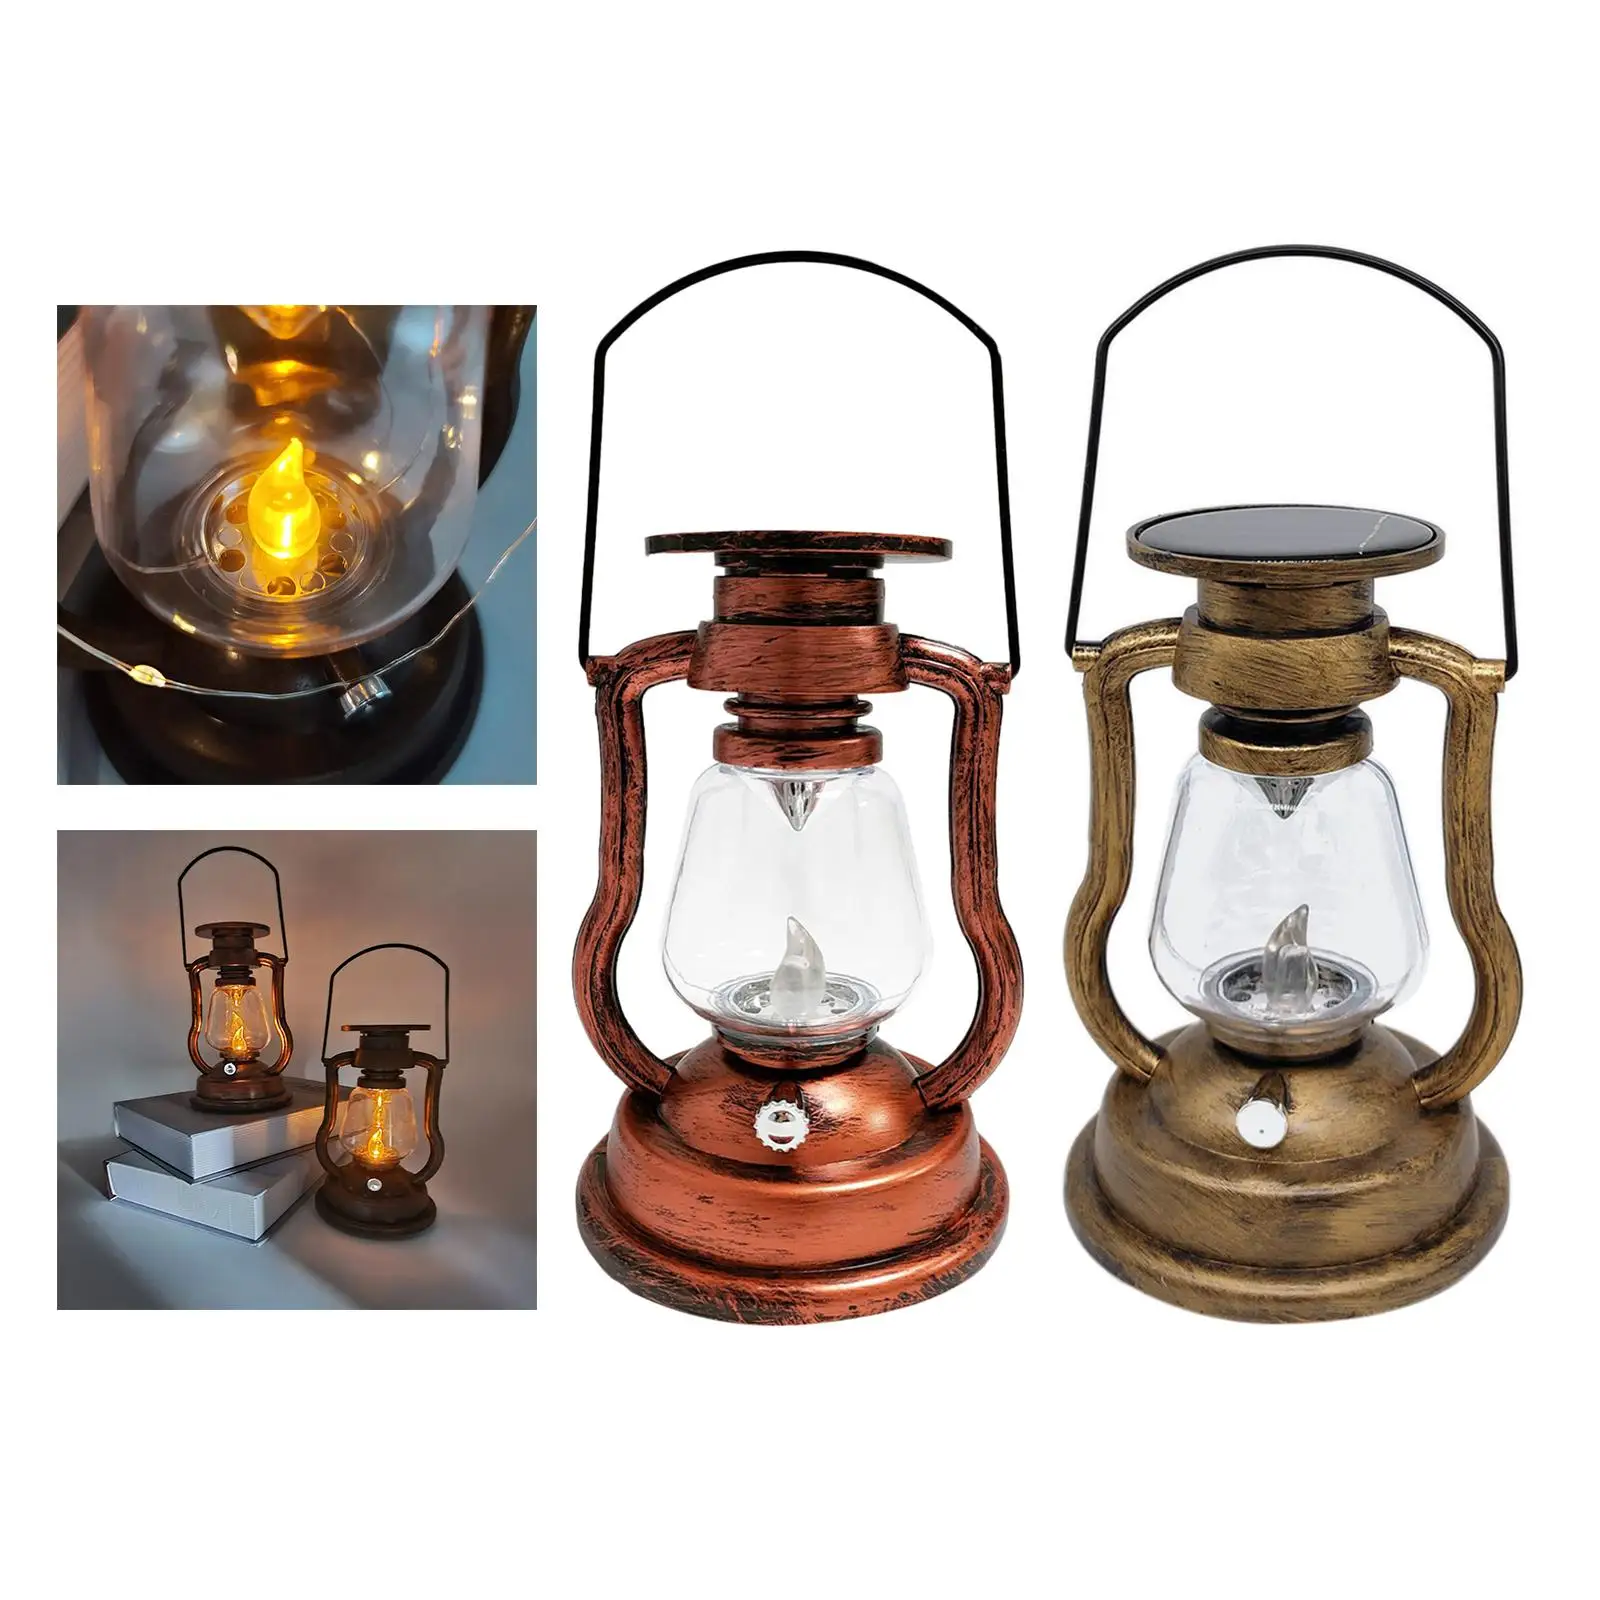 LED Camping Lanterns Solar Powered Lighting Fishing Handheld or Hanging Retro Style Tent Light Camping Lamp for Fence Path Decor